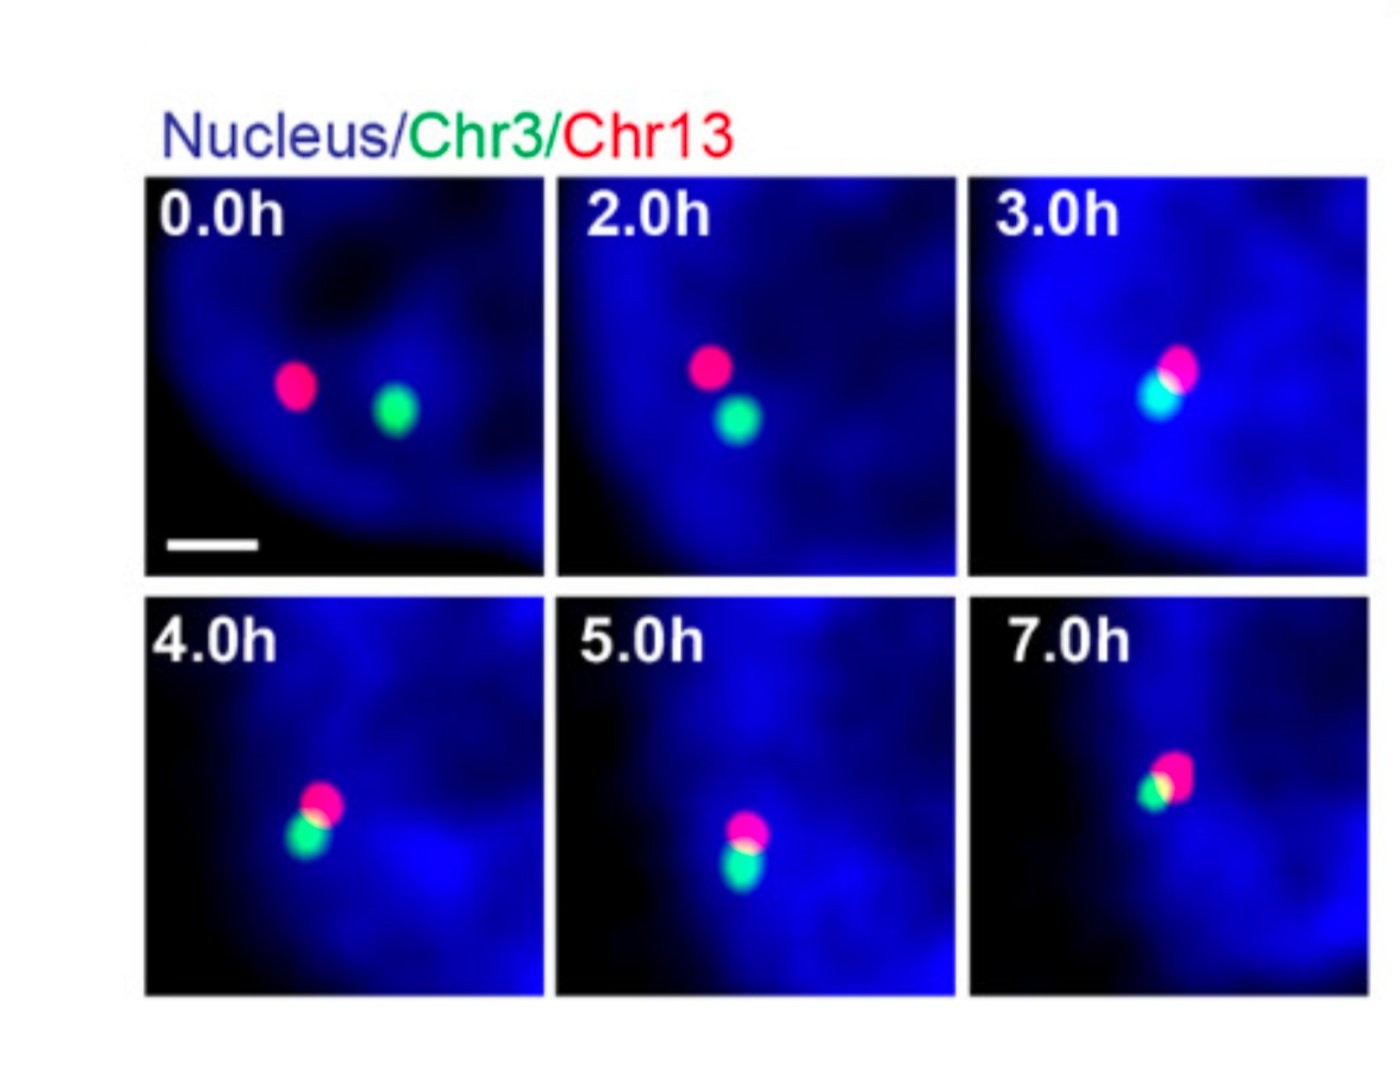 Fluorescent images from CRISPR LiveFISH show the chromosomes (in red and green) movement and translocation over time (hours in the top left of each panel).